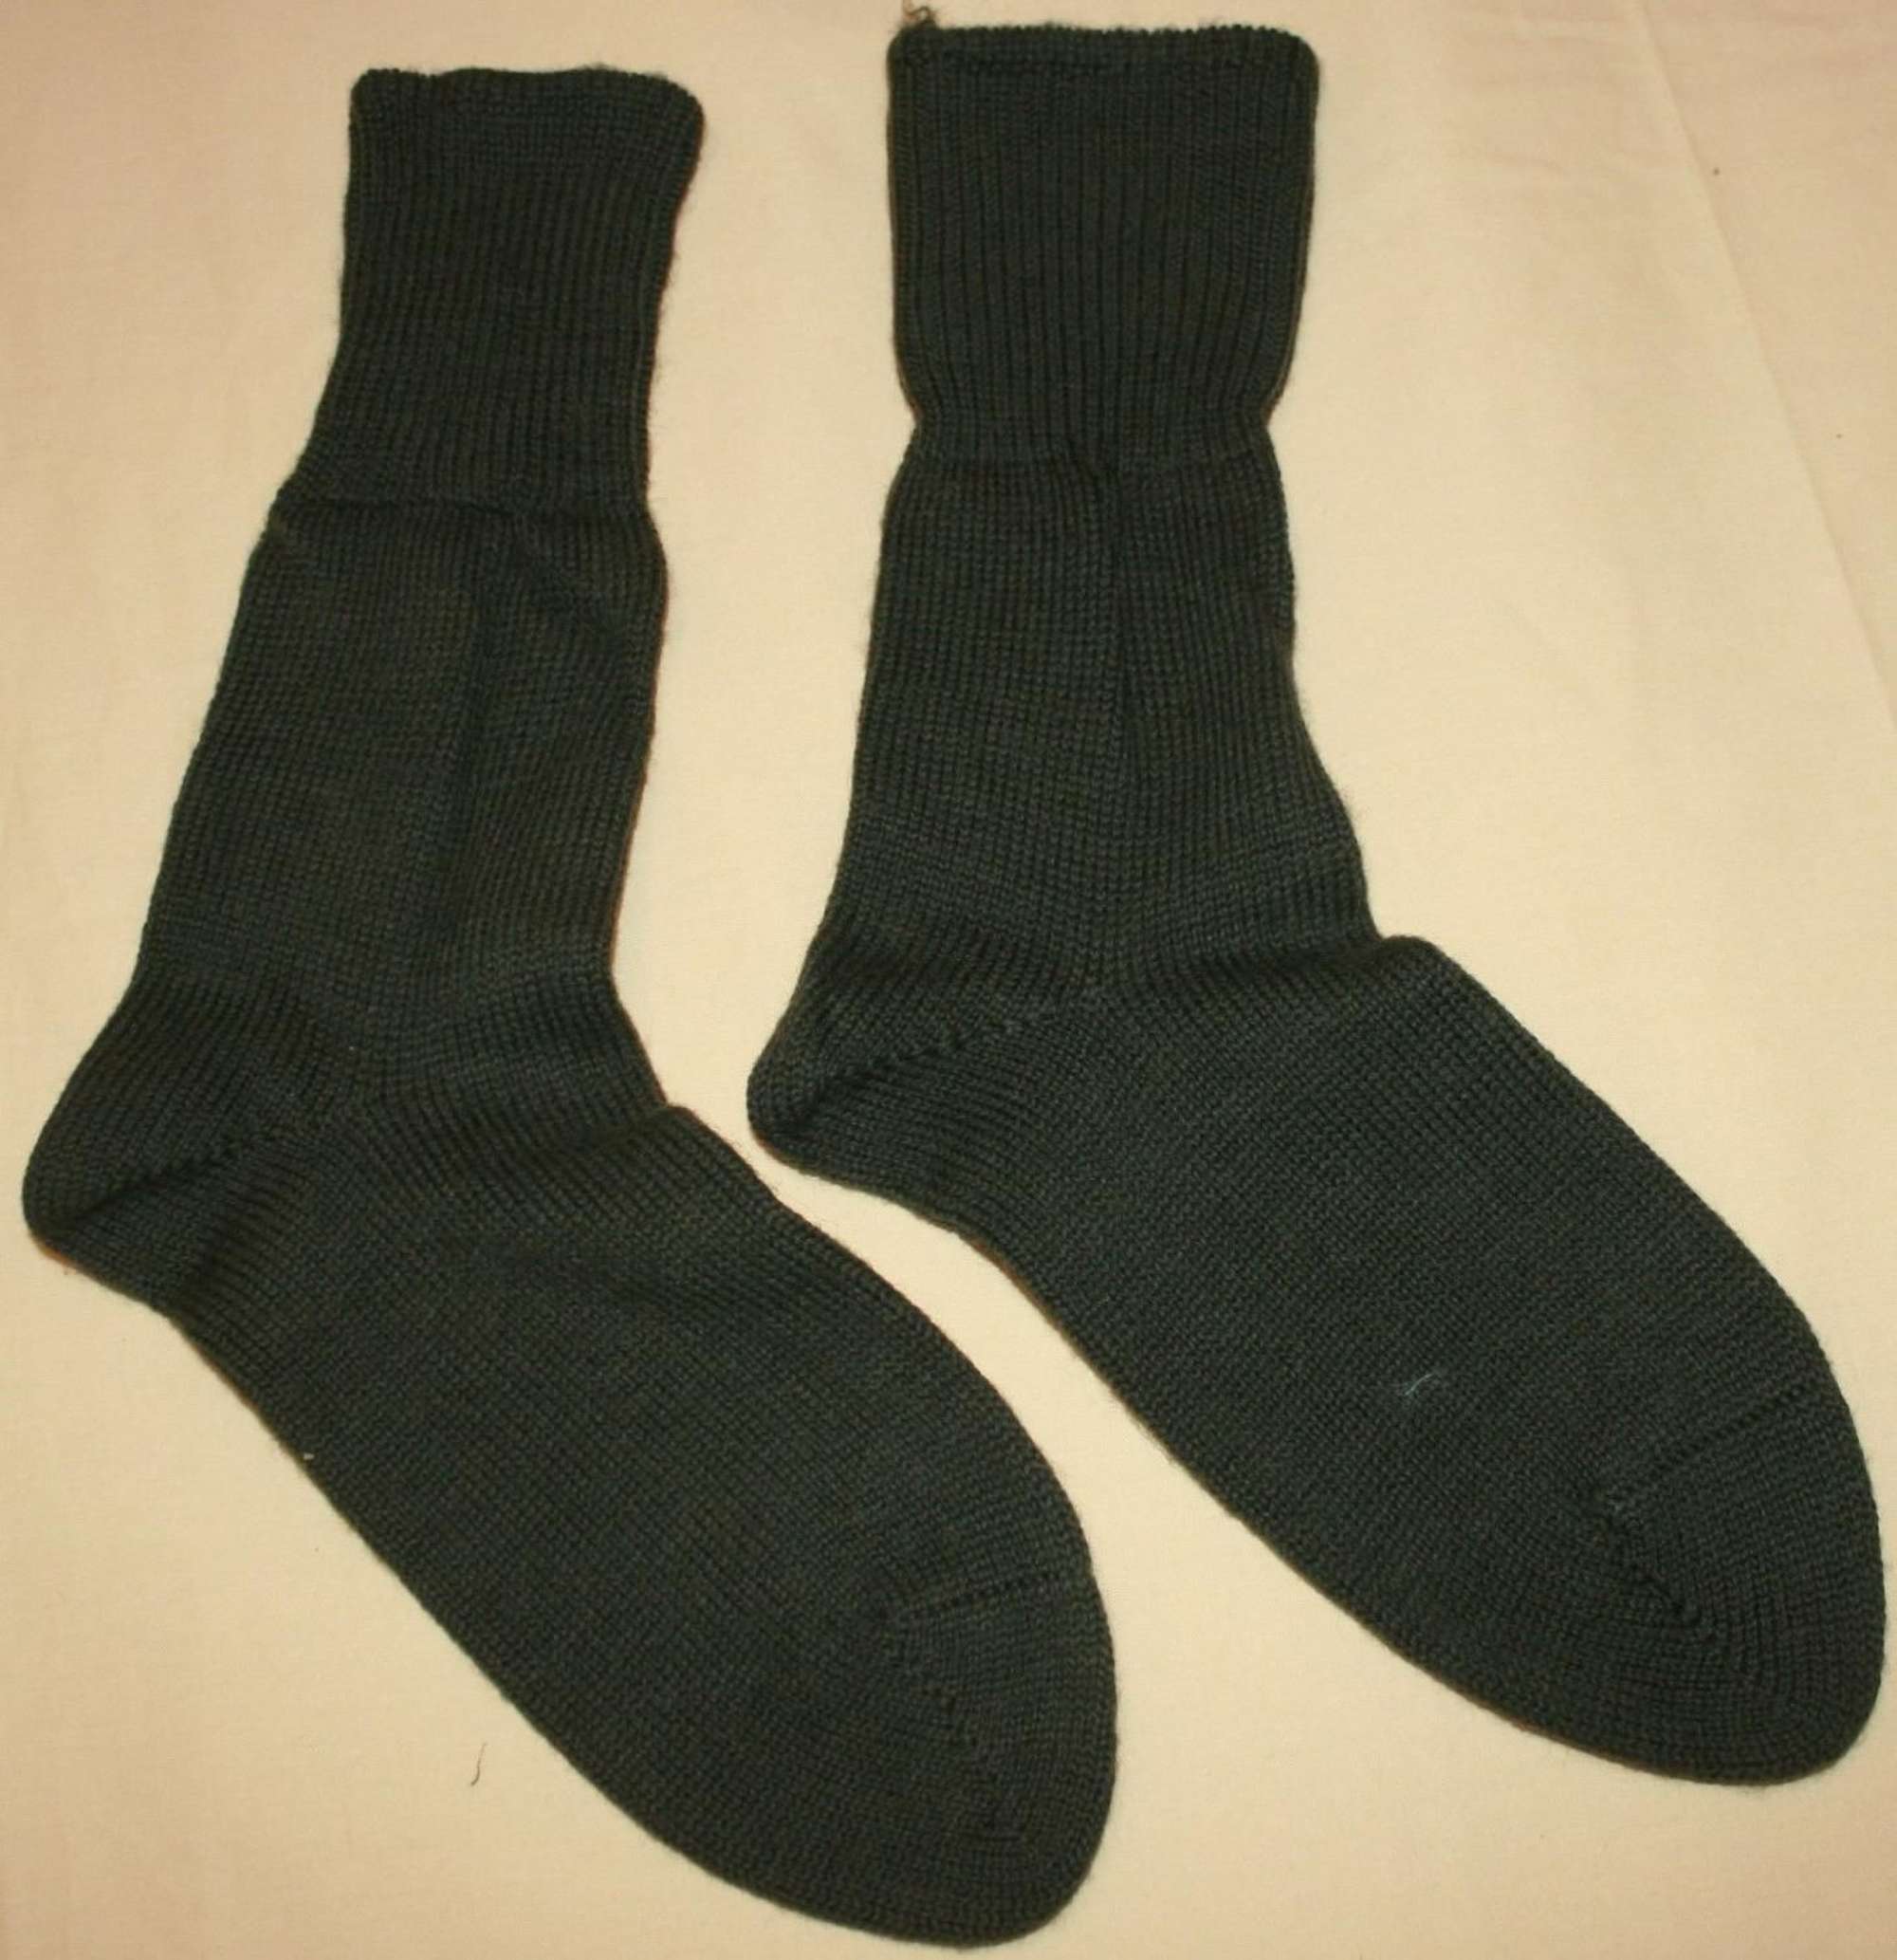 A MATCHING PAIR OF THE 1945 DATED JUNGLE SOCKS